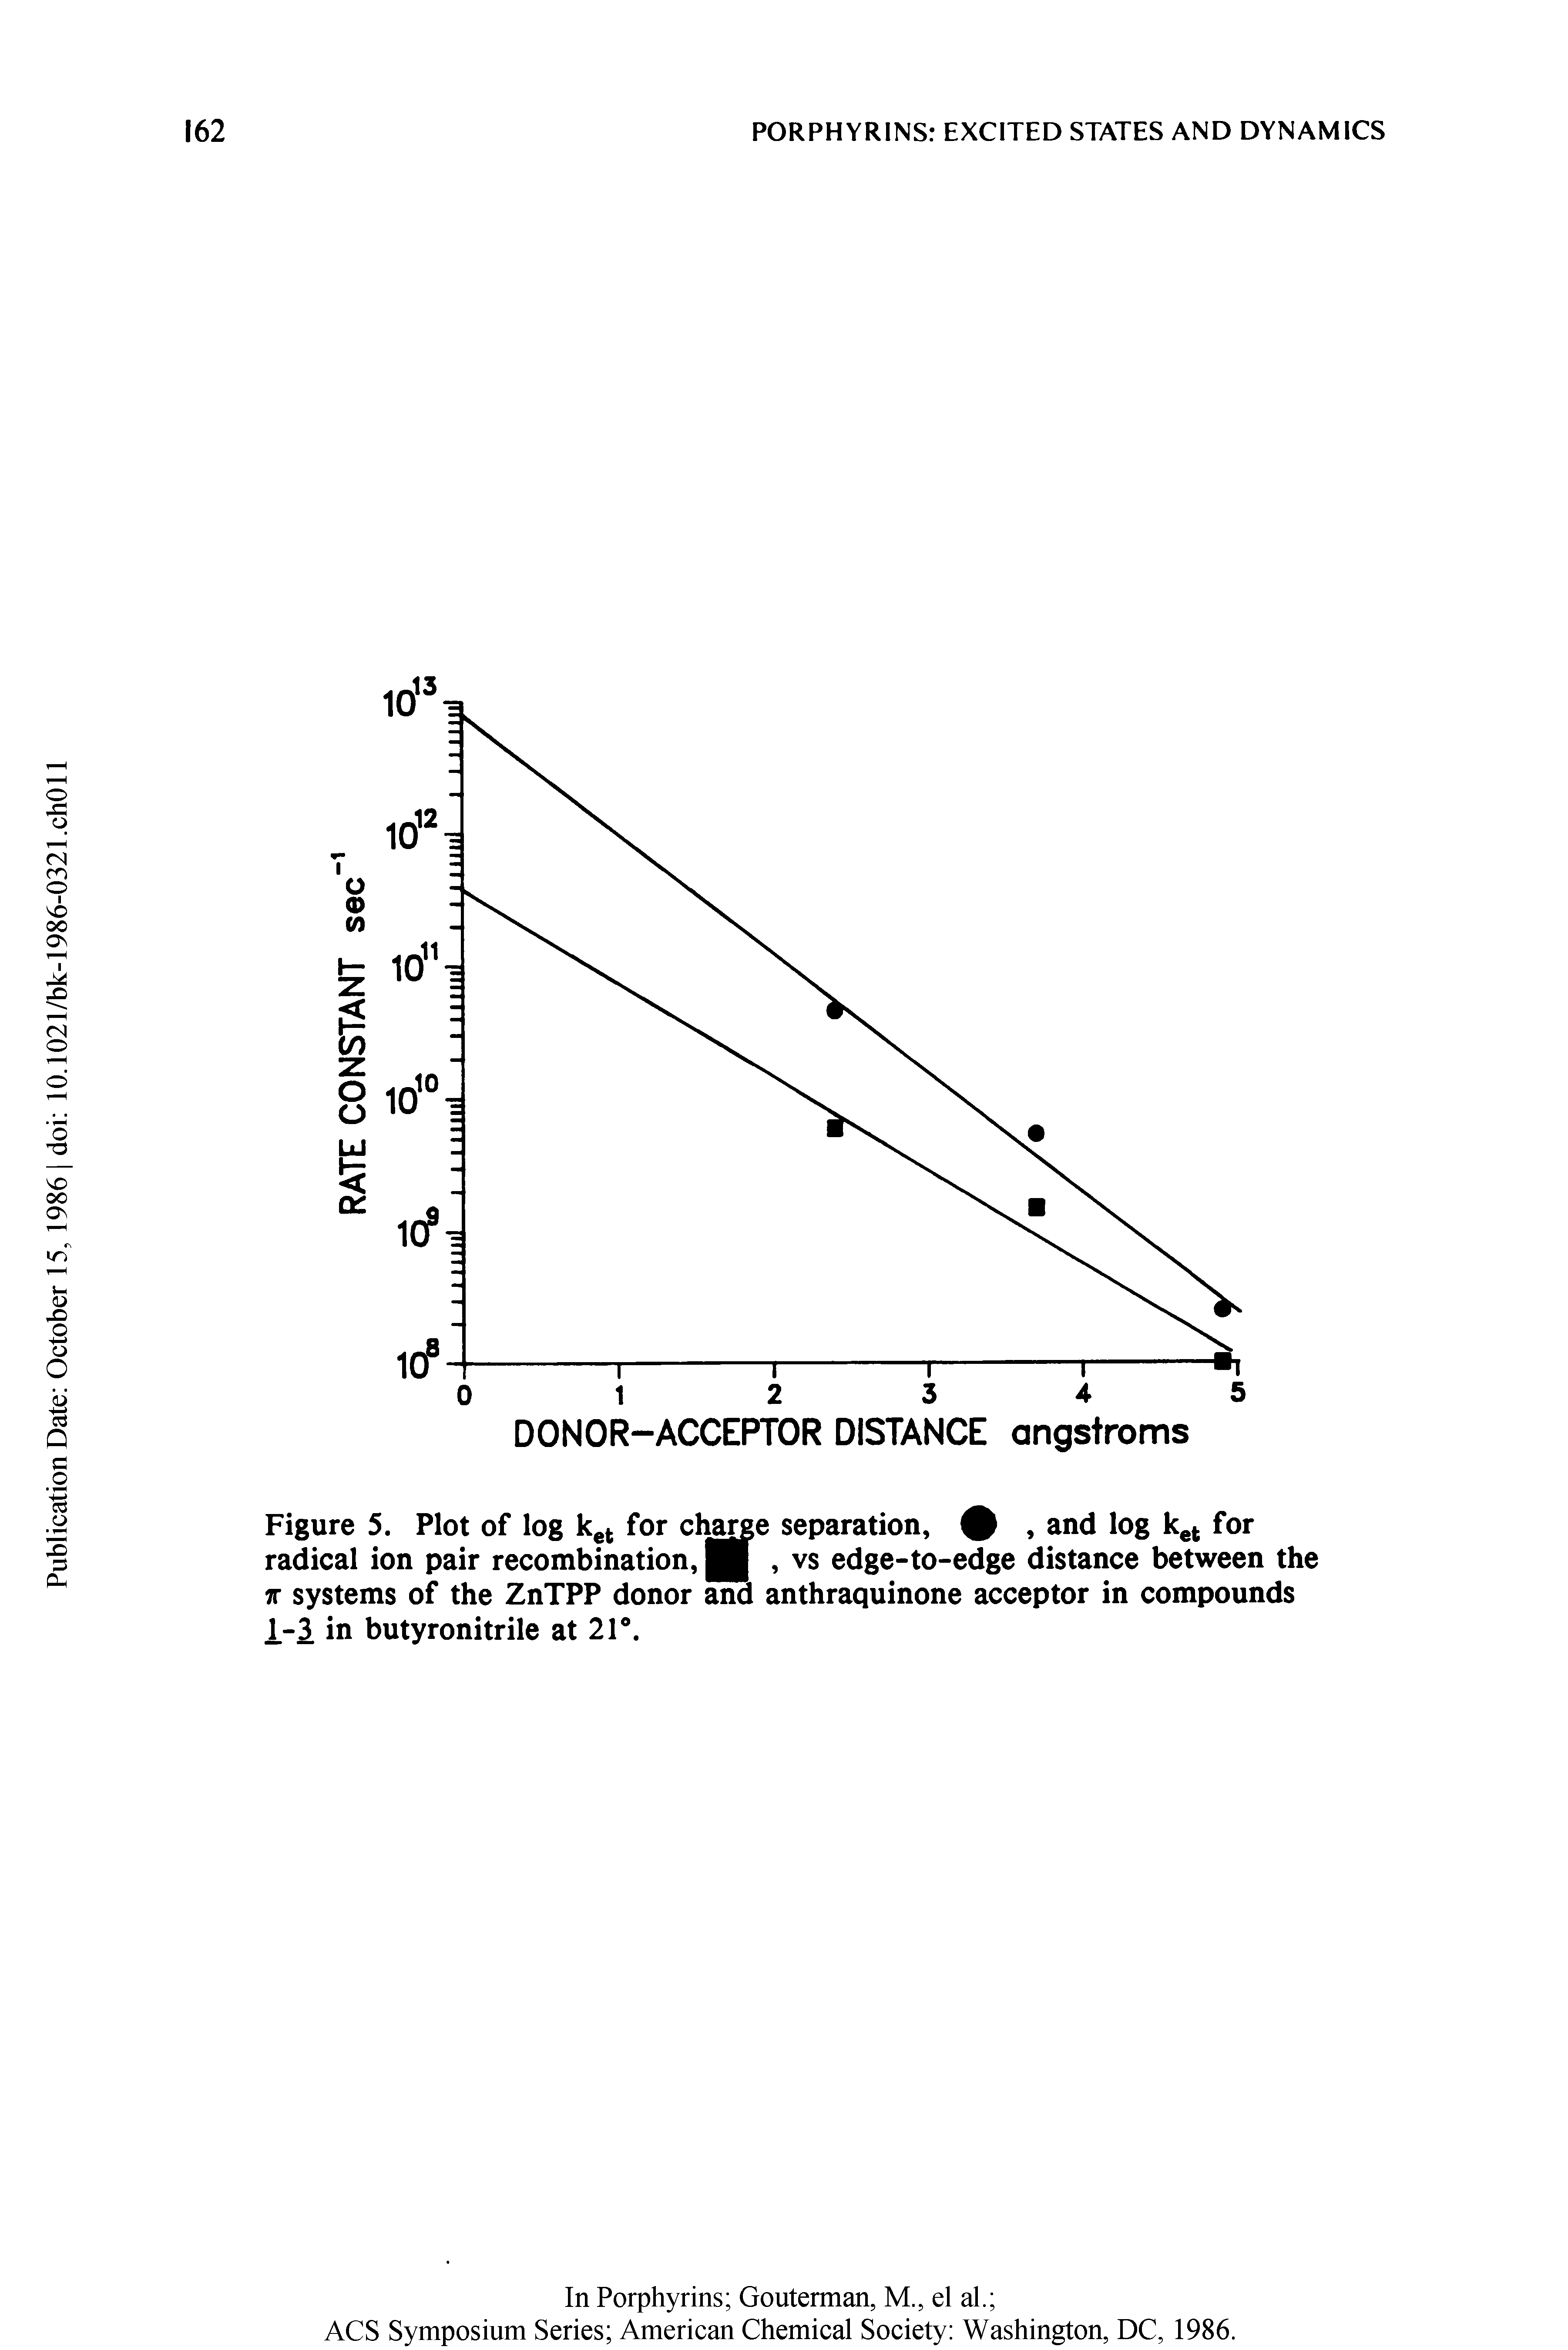 Figure 5. Plot of log for clgree separation,, and log for radical ion pair recombination, j [, vs edge-to-edge distance between the 7T systems of the ZnTPP donor and anthraquinone acceptor in compounds 1-3 in butyronitrile at 21 .